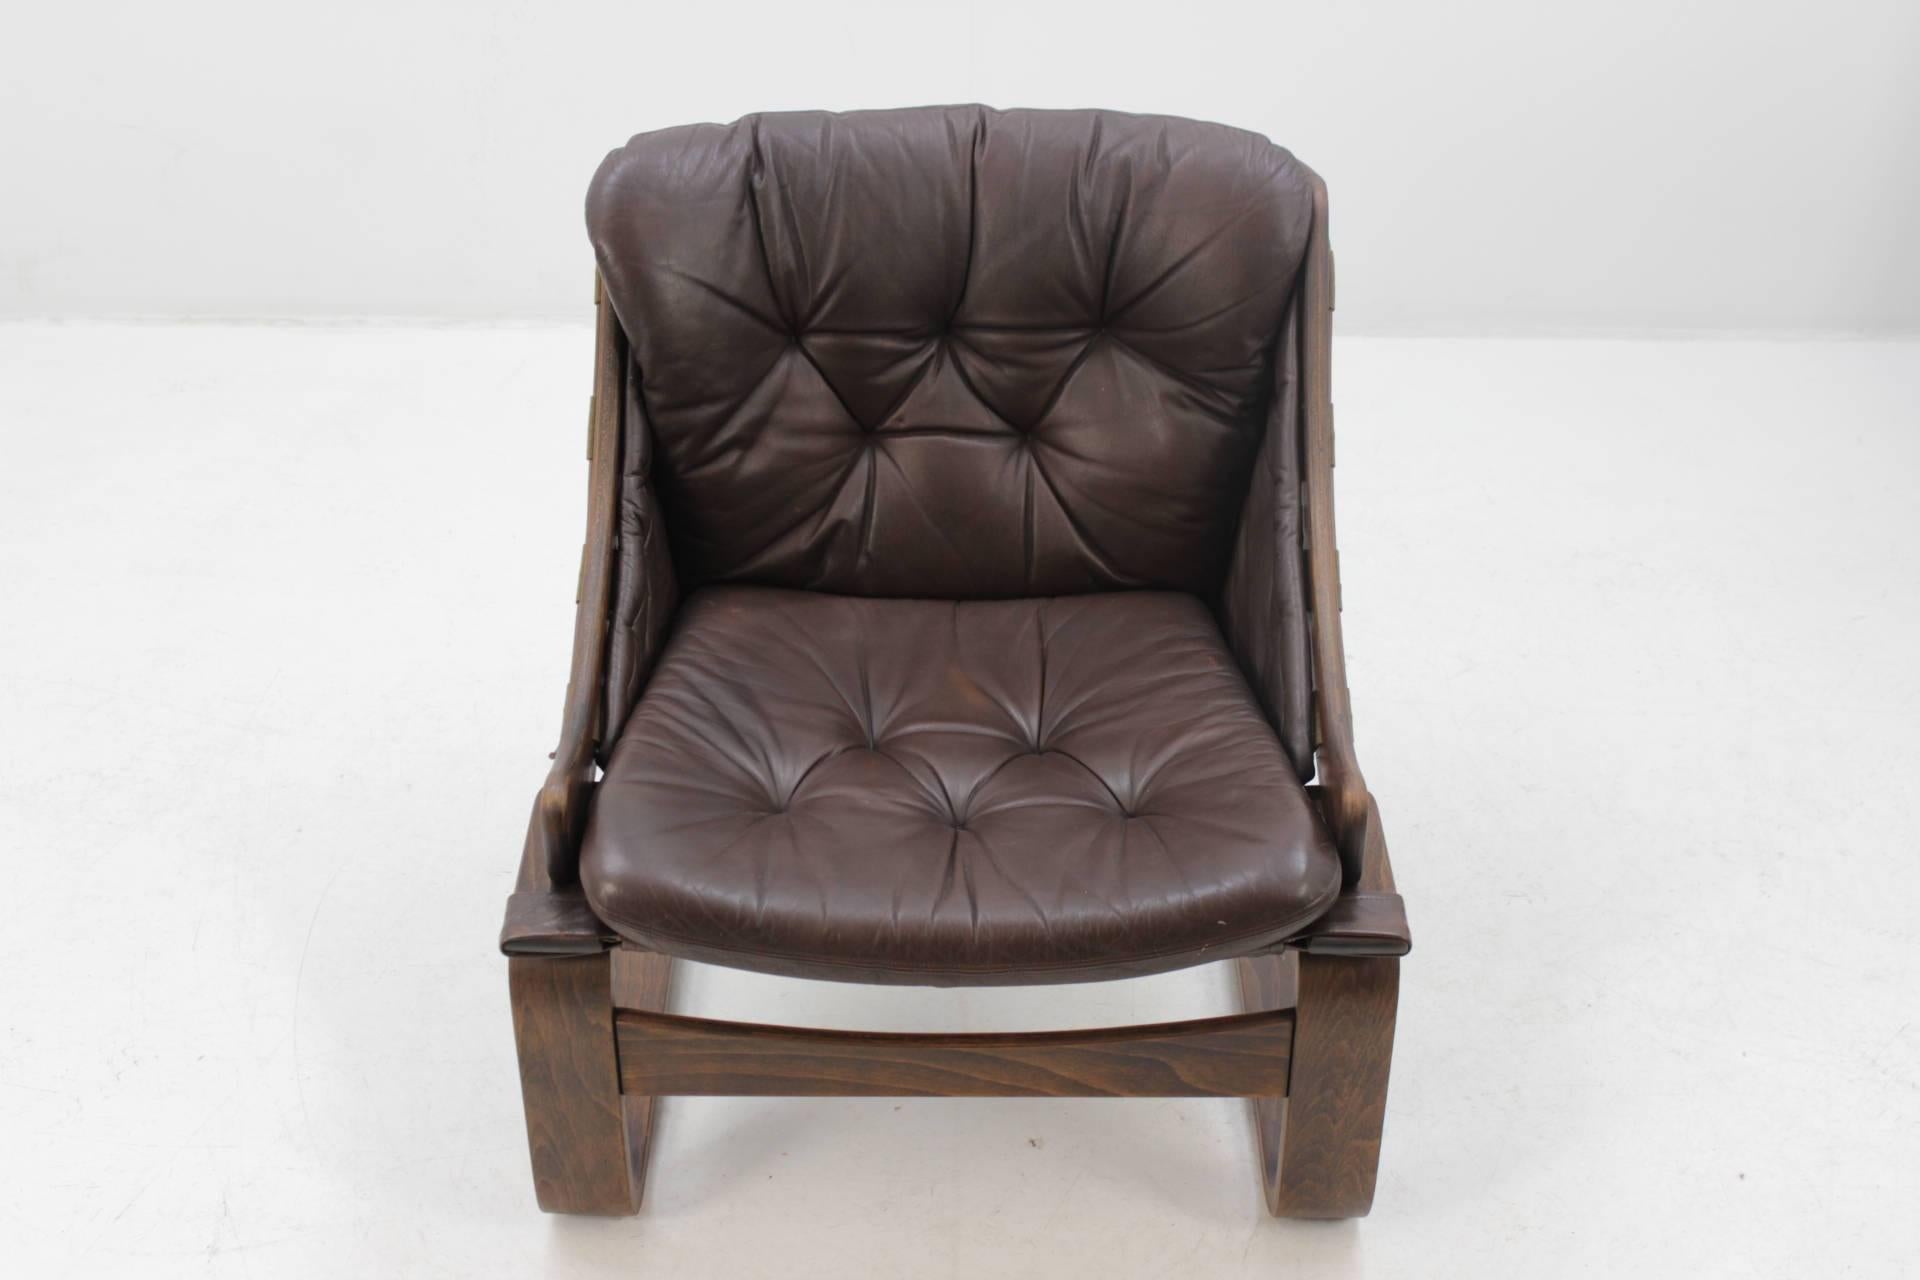 Late 20th Century 1970s Scandinavian Bentwood Leather Lounge chair by Ake Fribytter for Nelo Mobel